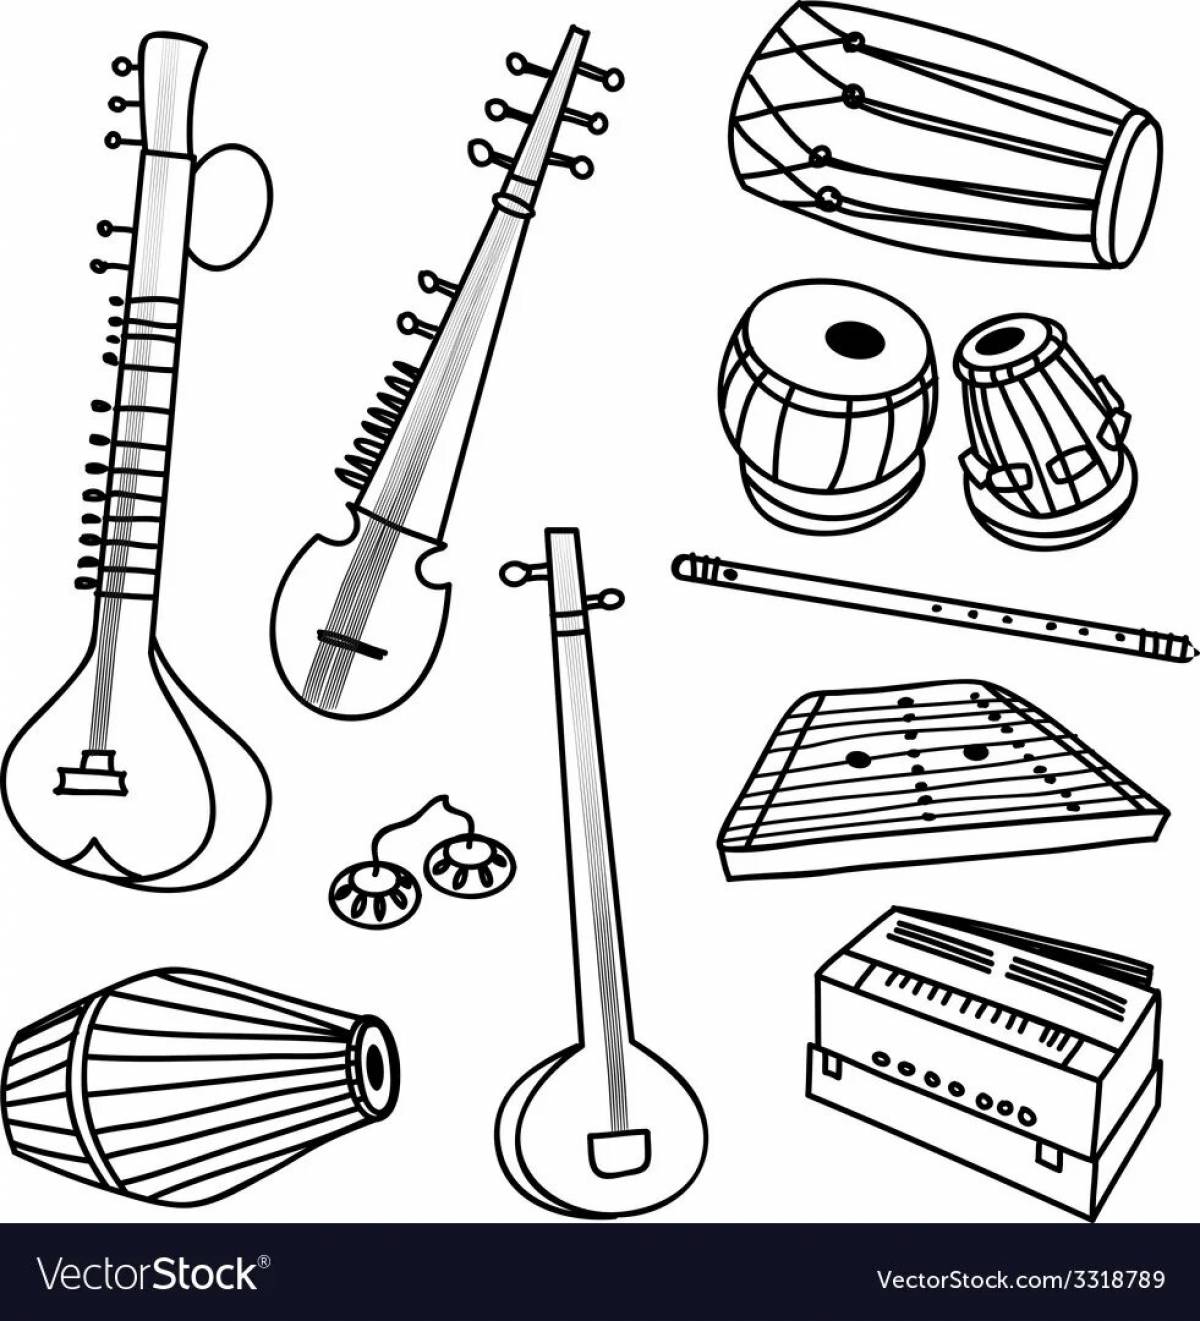 Russian folk instruments for children with names #21